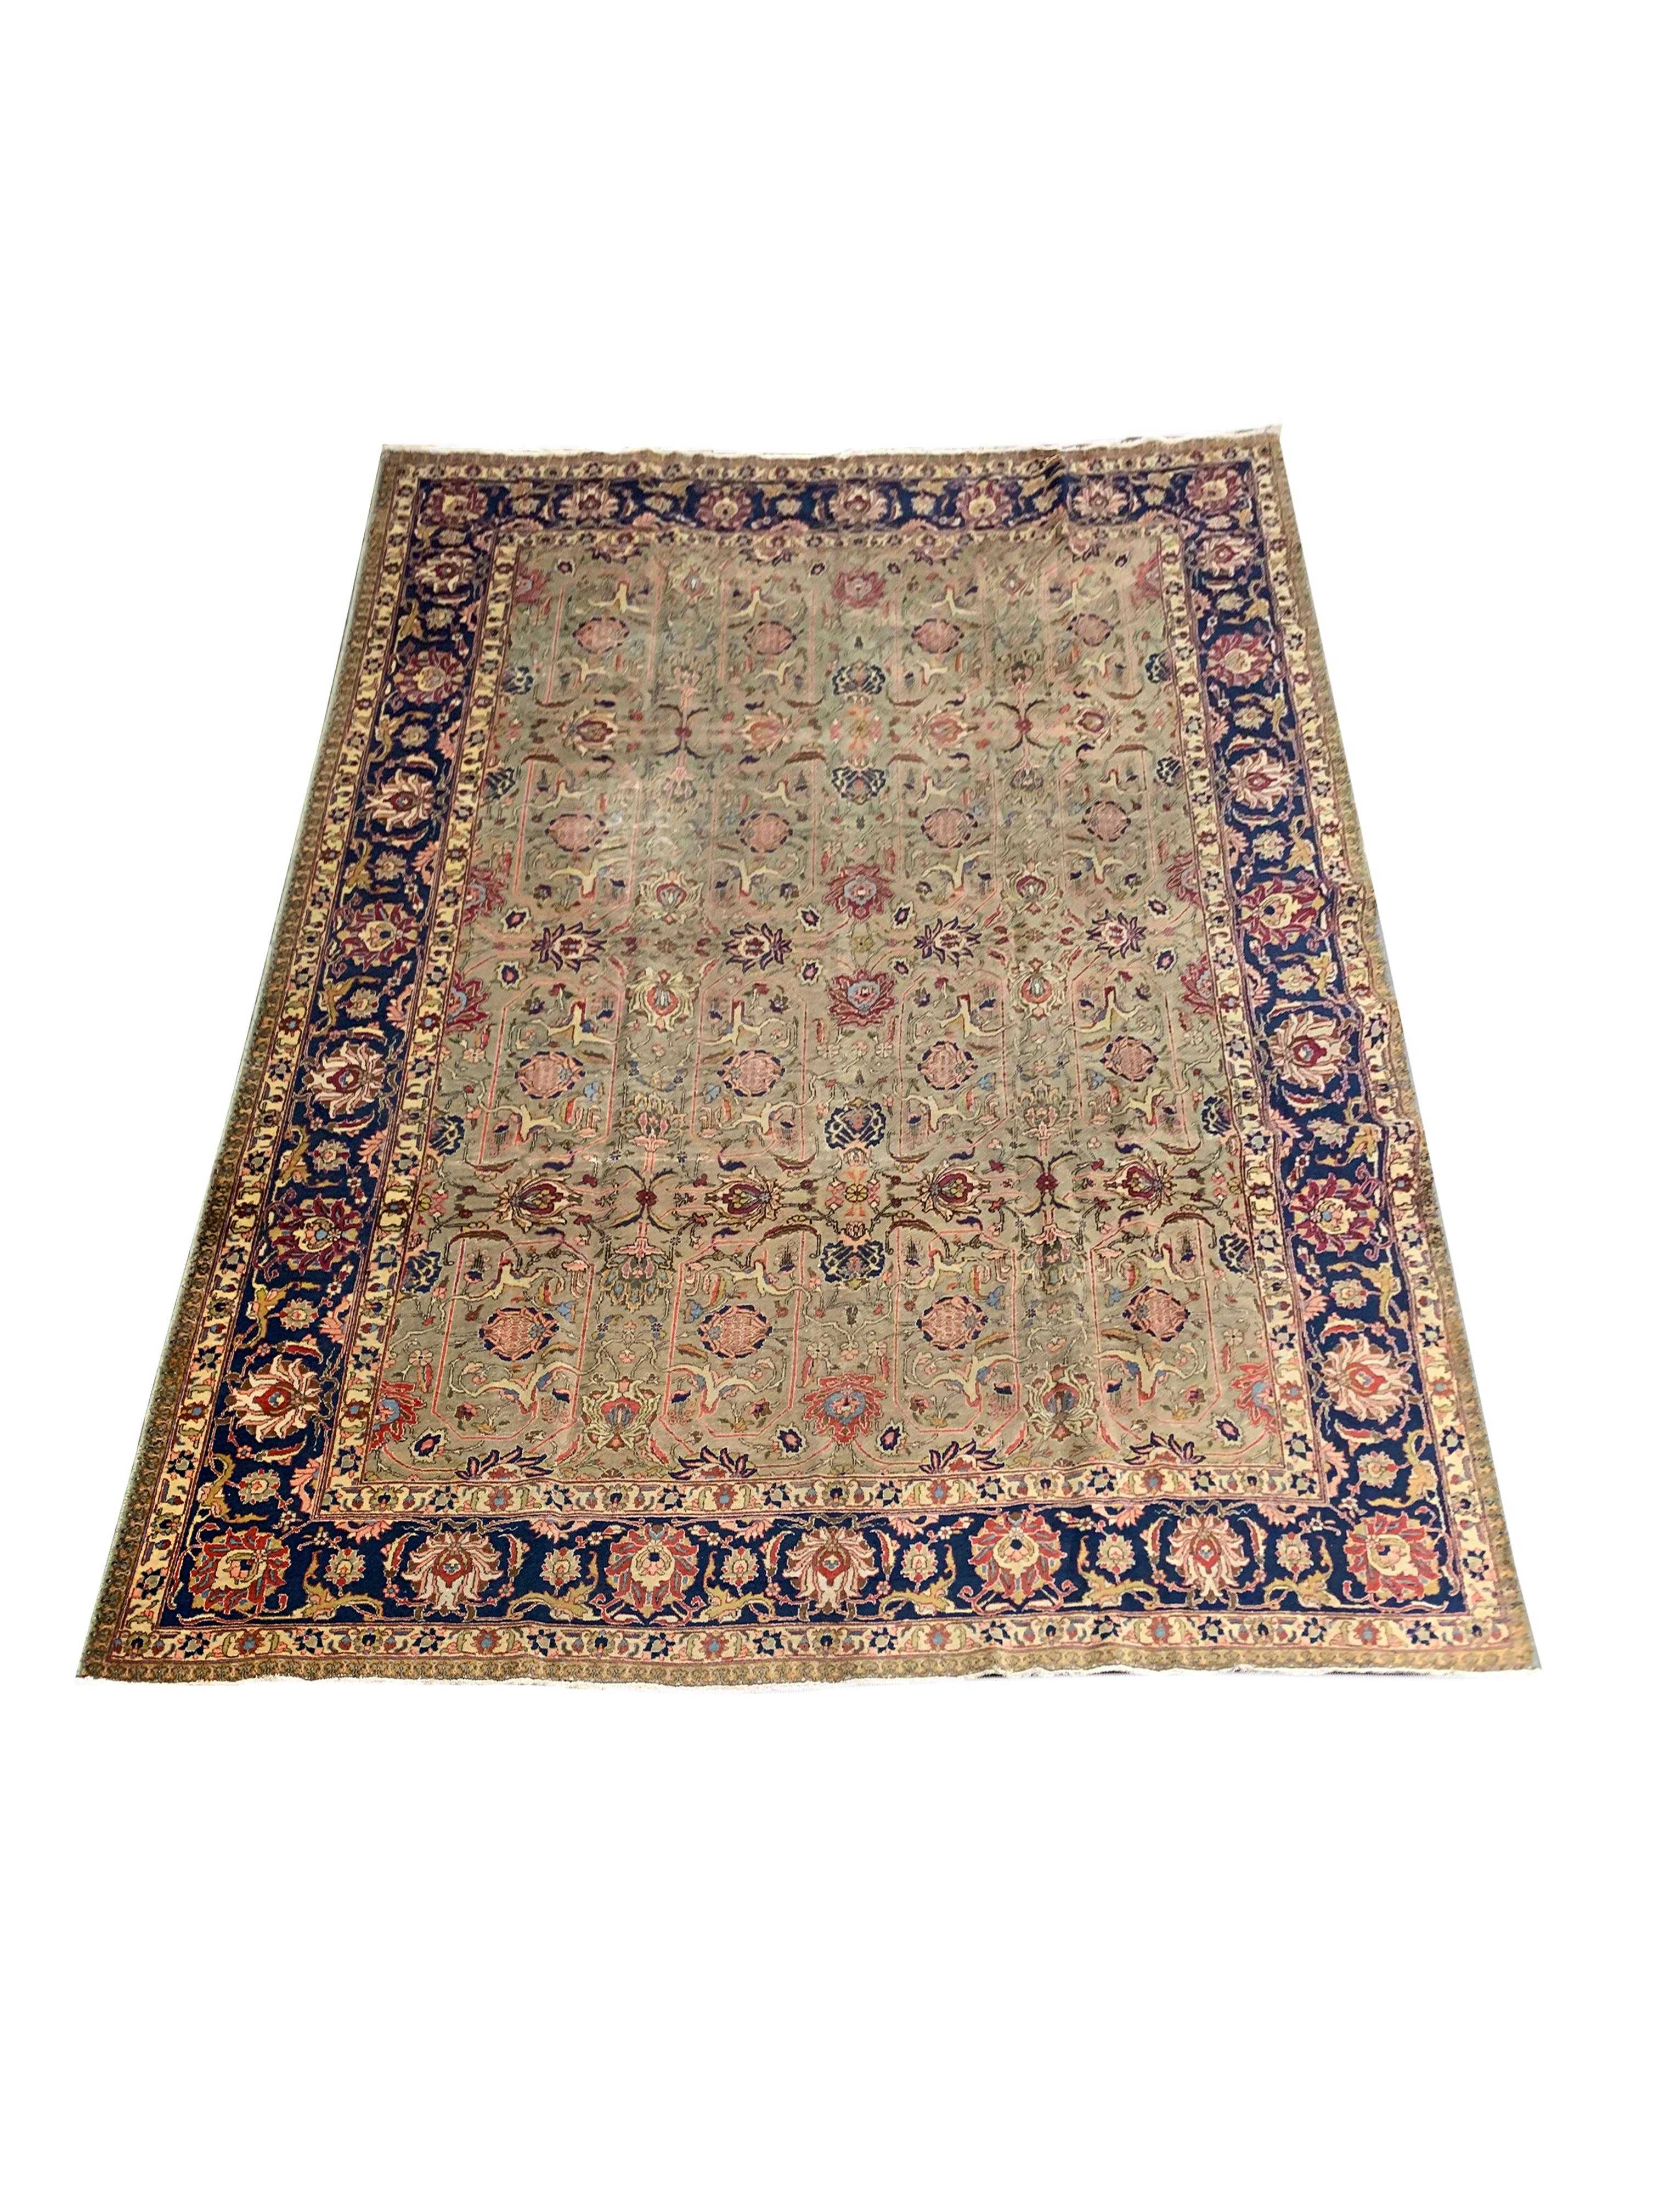 This striking area rug is a vintage handwoven wool area rug. The design features a green background colour with accents of red, pink, brown and beige that make up the intricate, Antique Rug with a decorative all over symmetrical design. A repeating